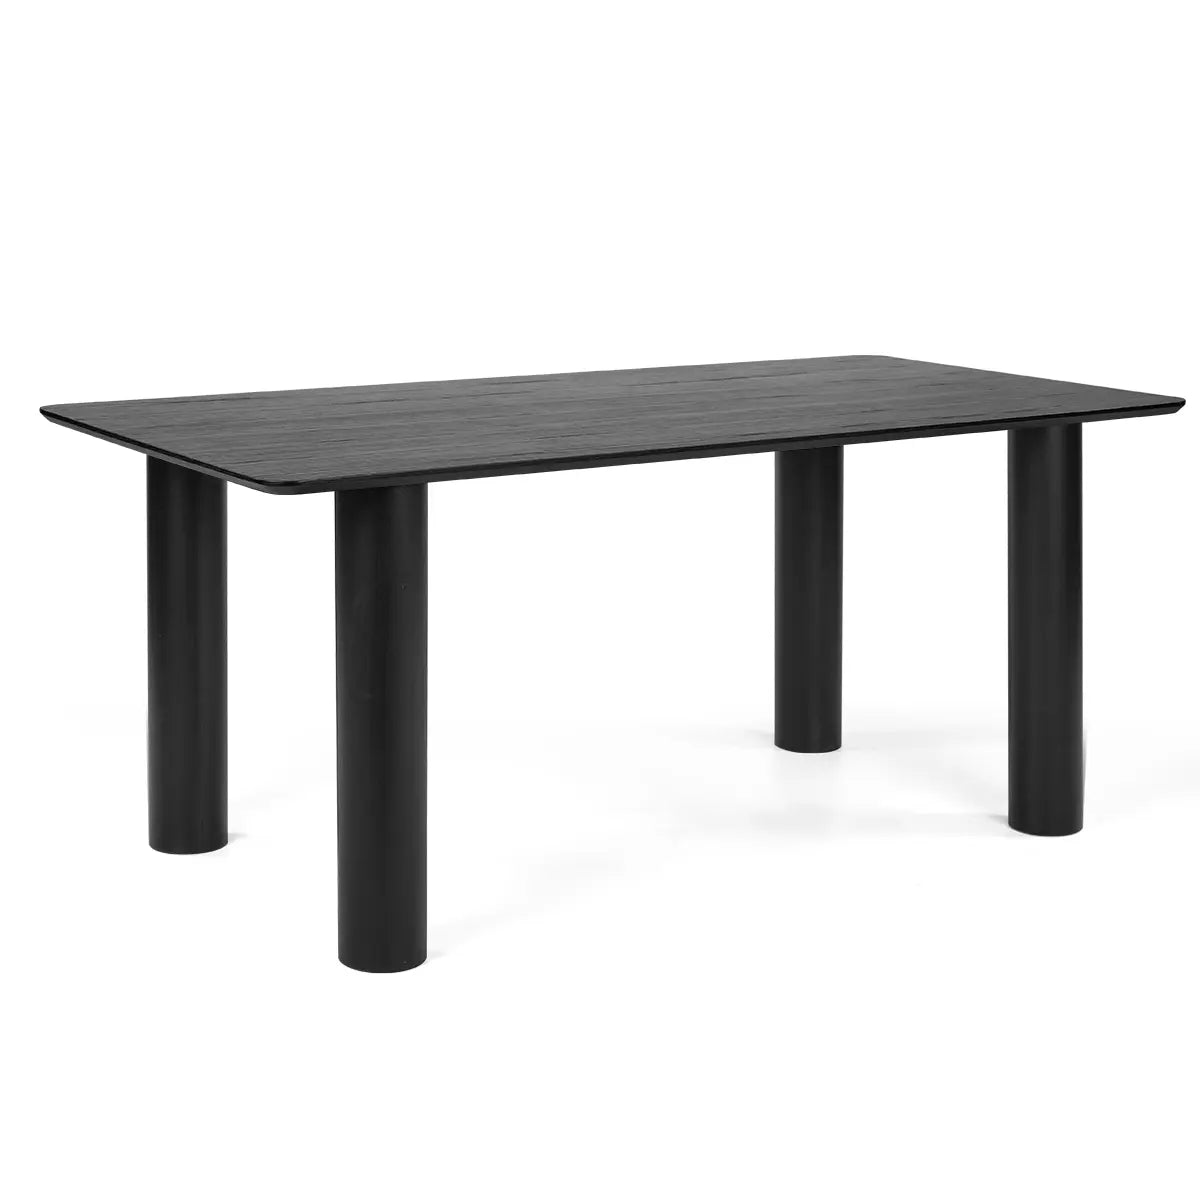 JOHSON 67" Wooden Dining Table The Pop Maison